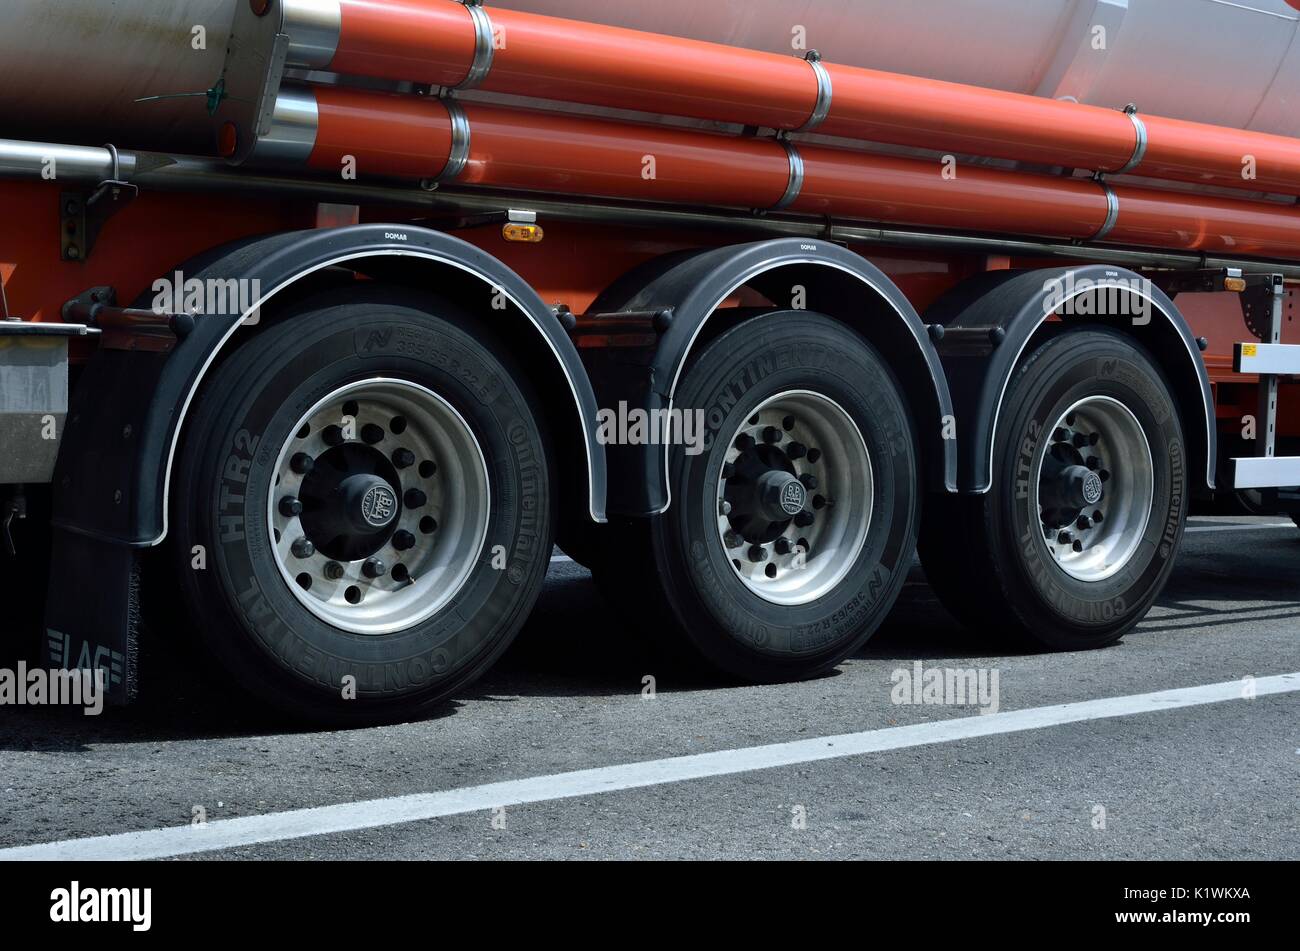 3 Truck Tyres In A row, Italy, Europe Stock Photo